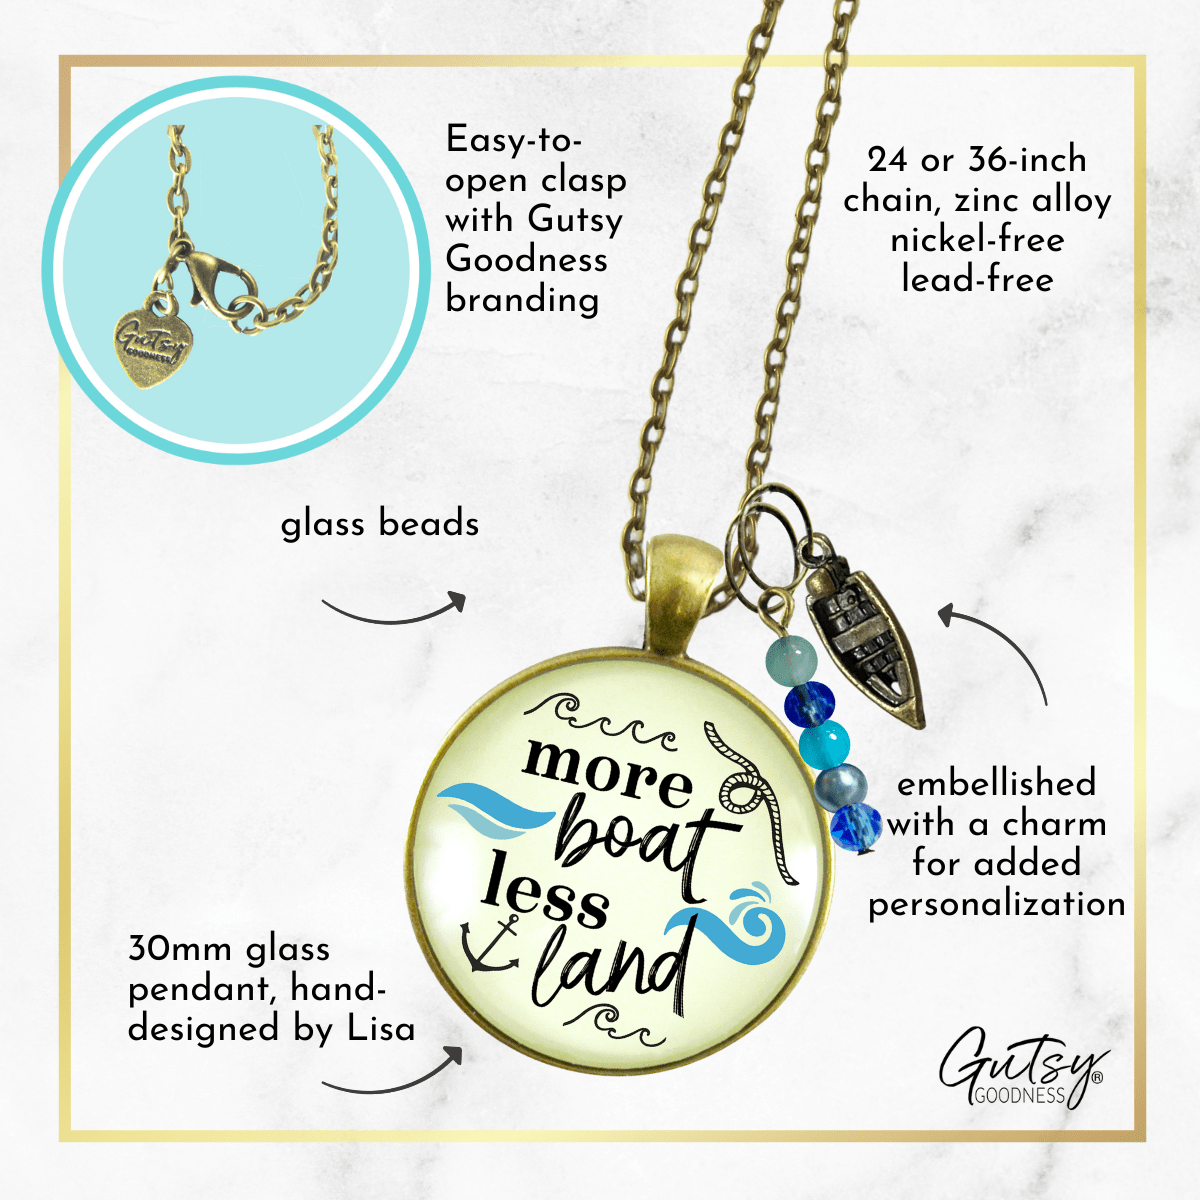 Boaters Necklace More Boat Less Land Nautical Sea Lake Life Pendant Boating Sea Glass Style Charms  Necklace - Gutsy Goodness Handmade Jewelry